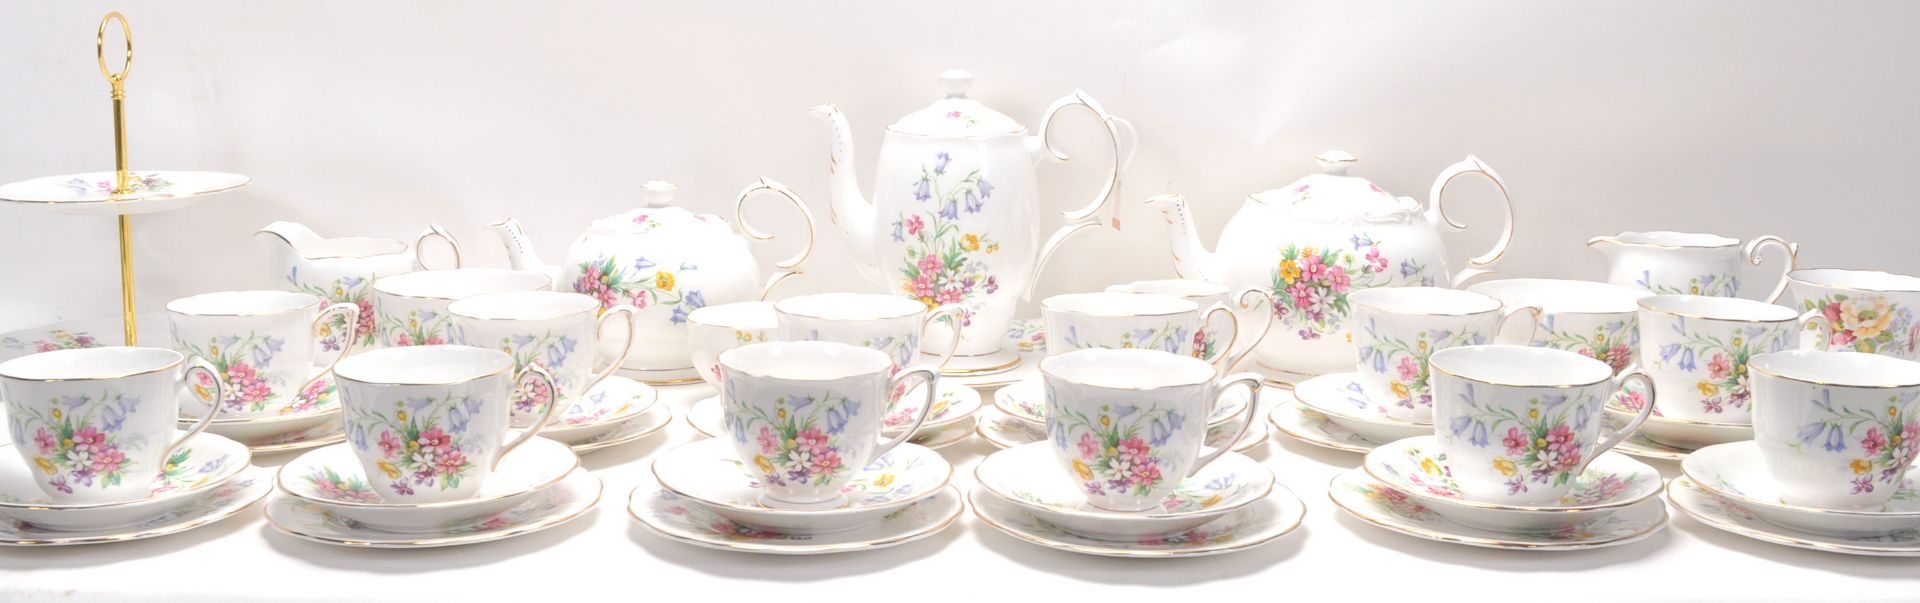 A Fine Bone China English tea service by Queen Anne China in the Old Country Spray pattern having